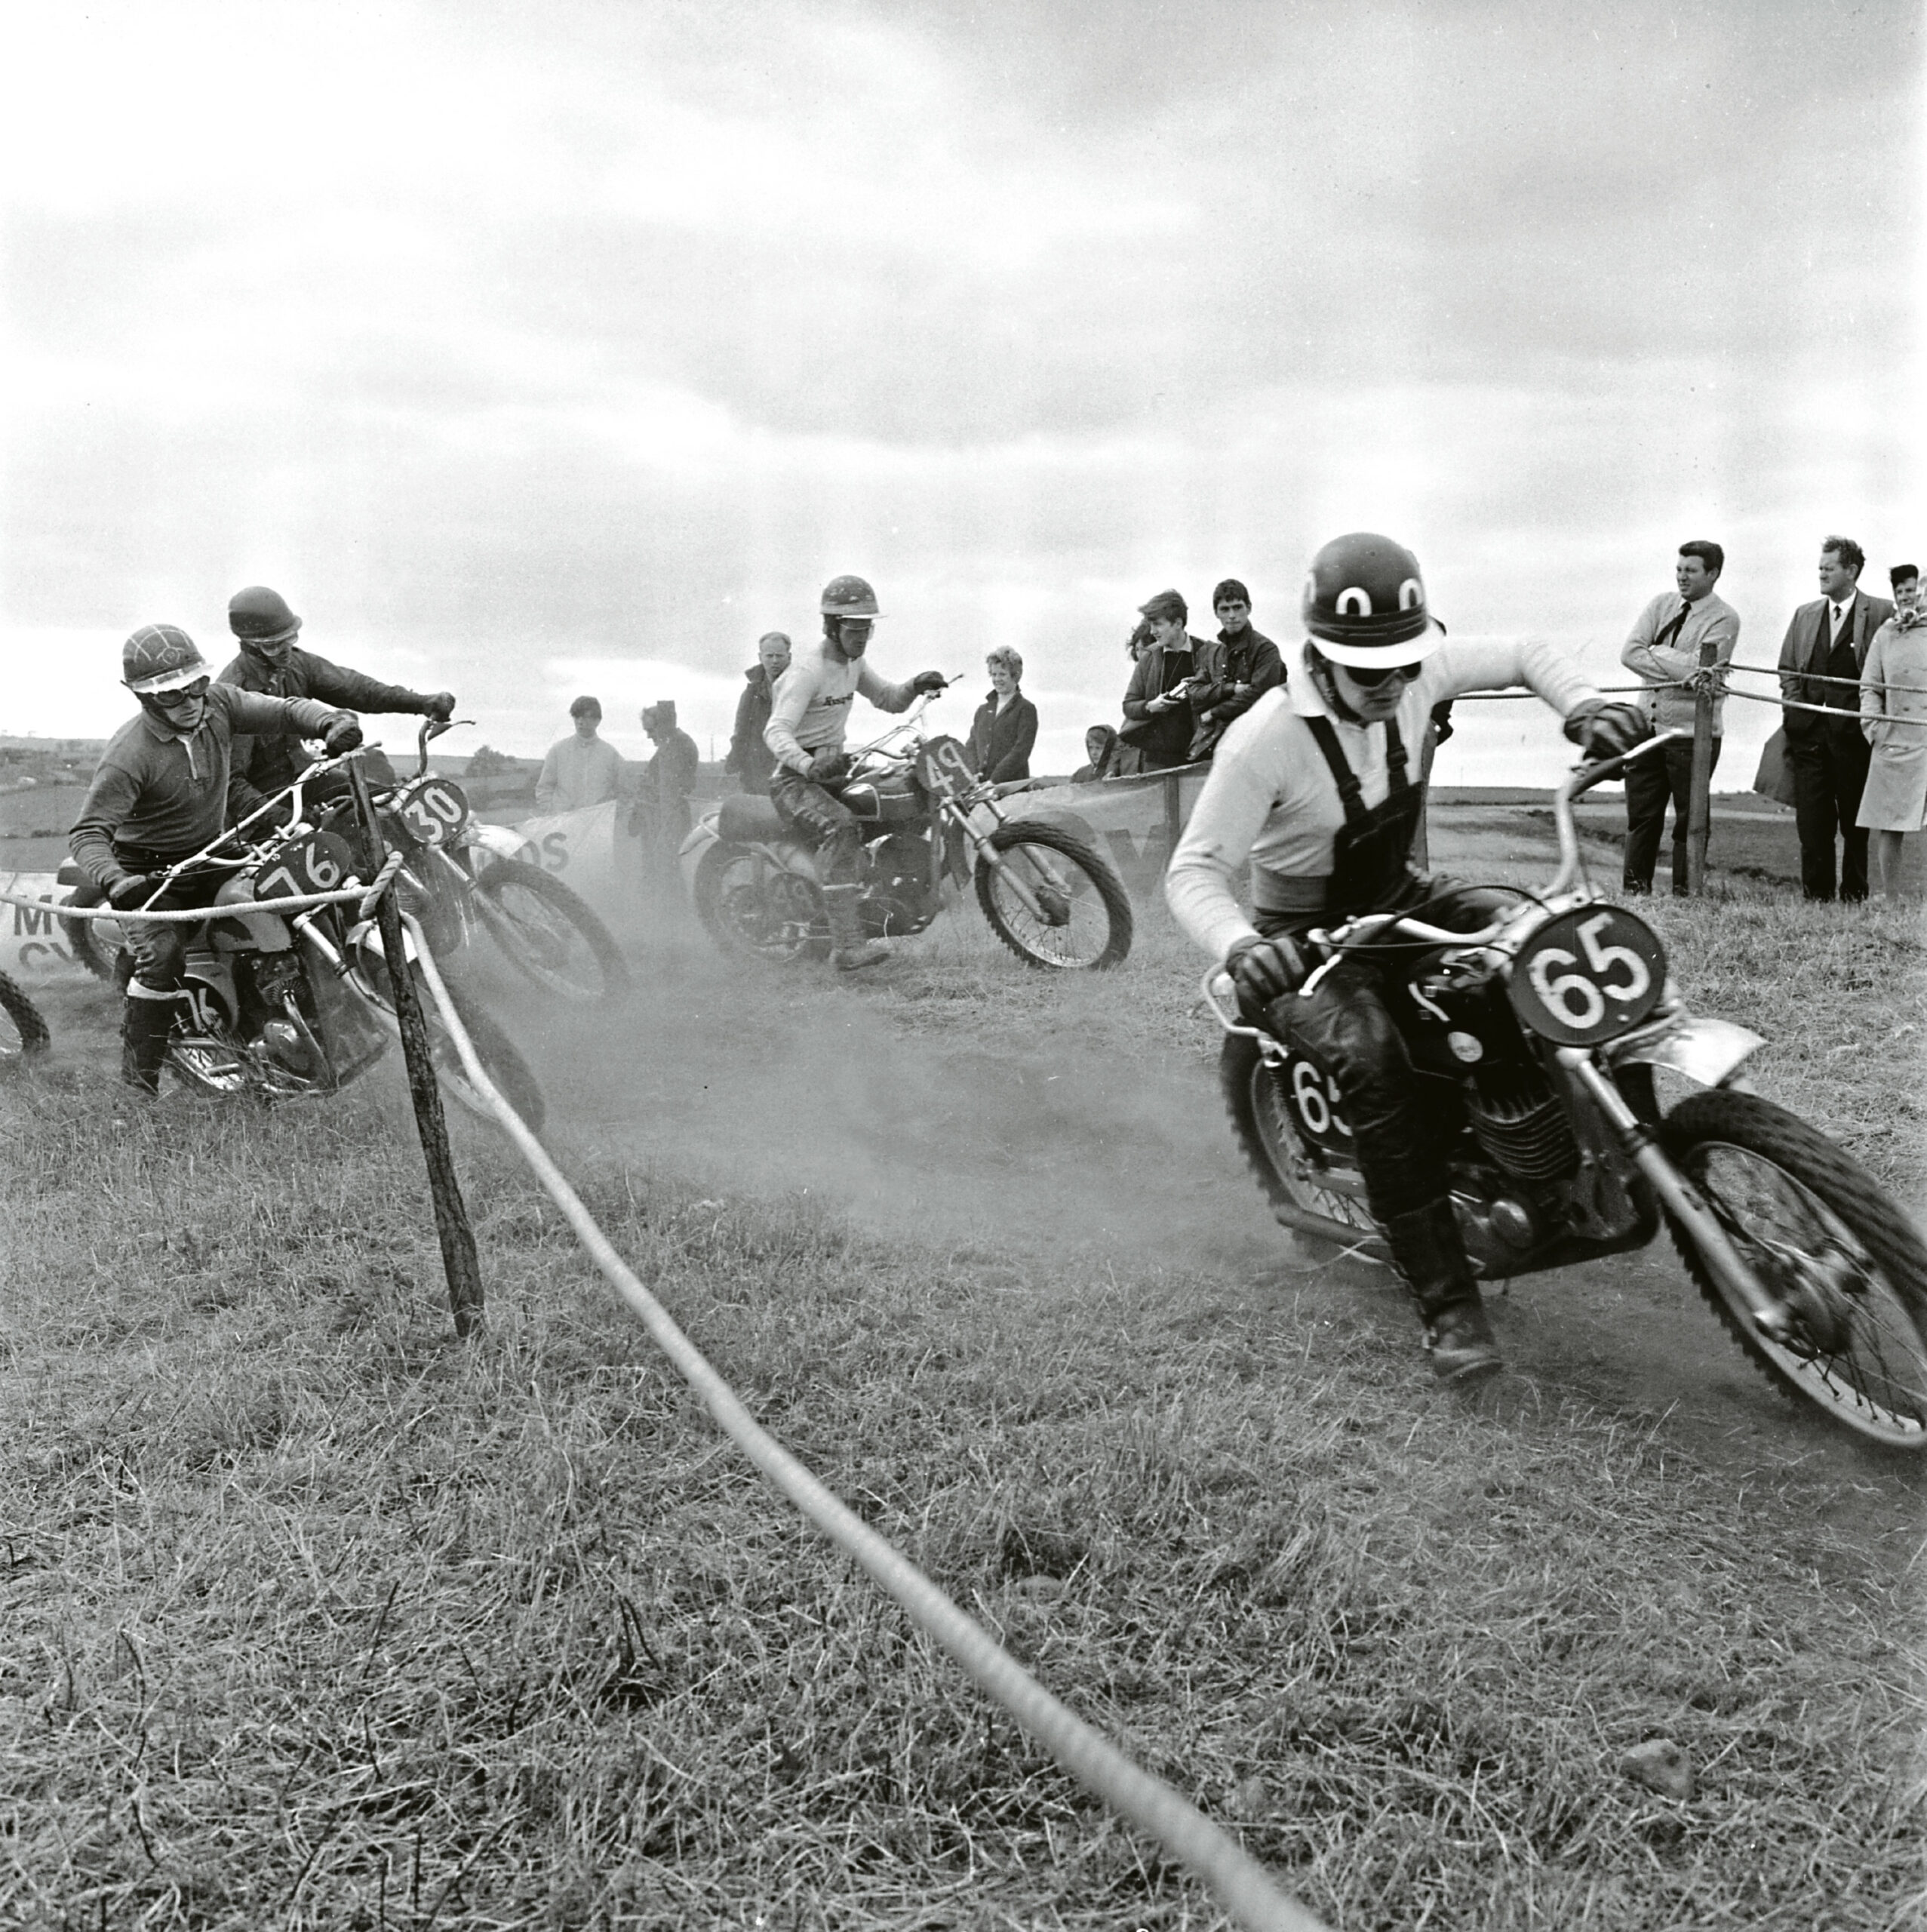 A competitor takes a corner in front of spectators at the Bon Accord Motor Cycle Club scramble in Aberdeen in August 1969.